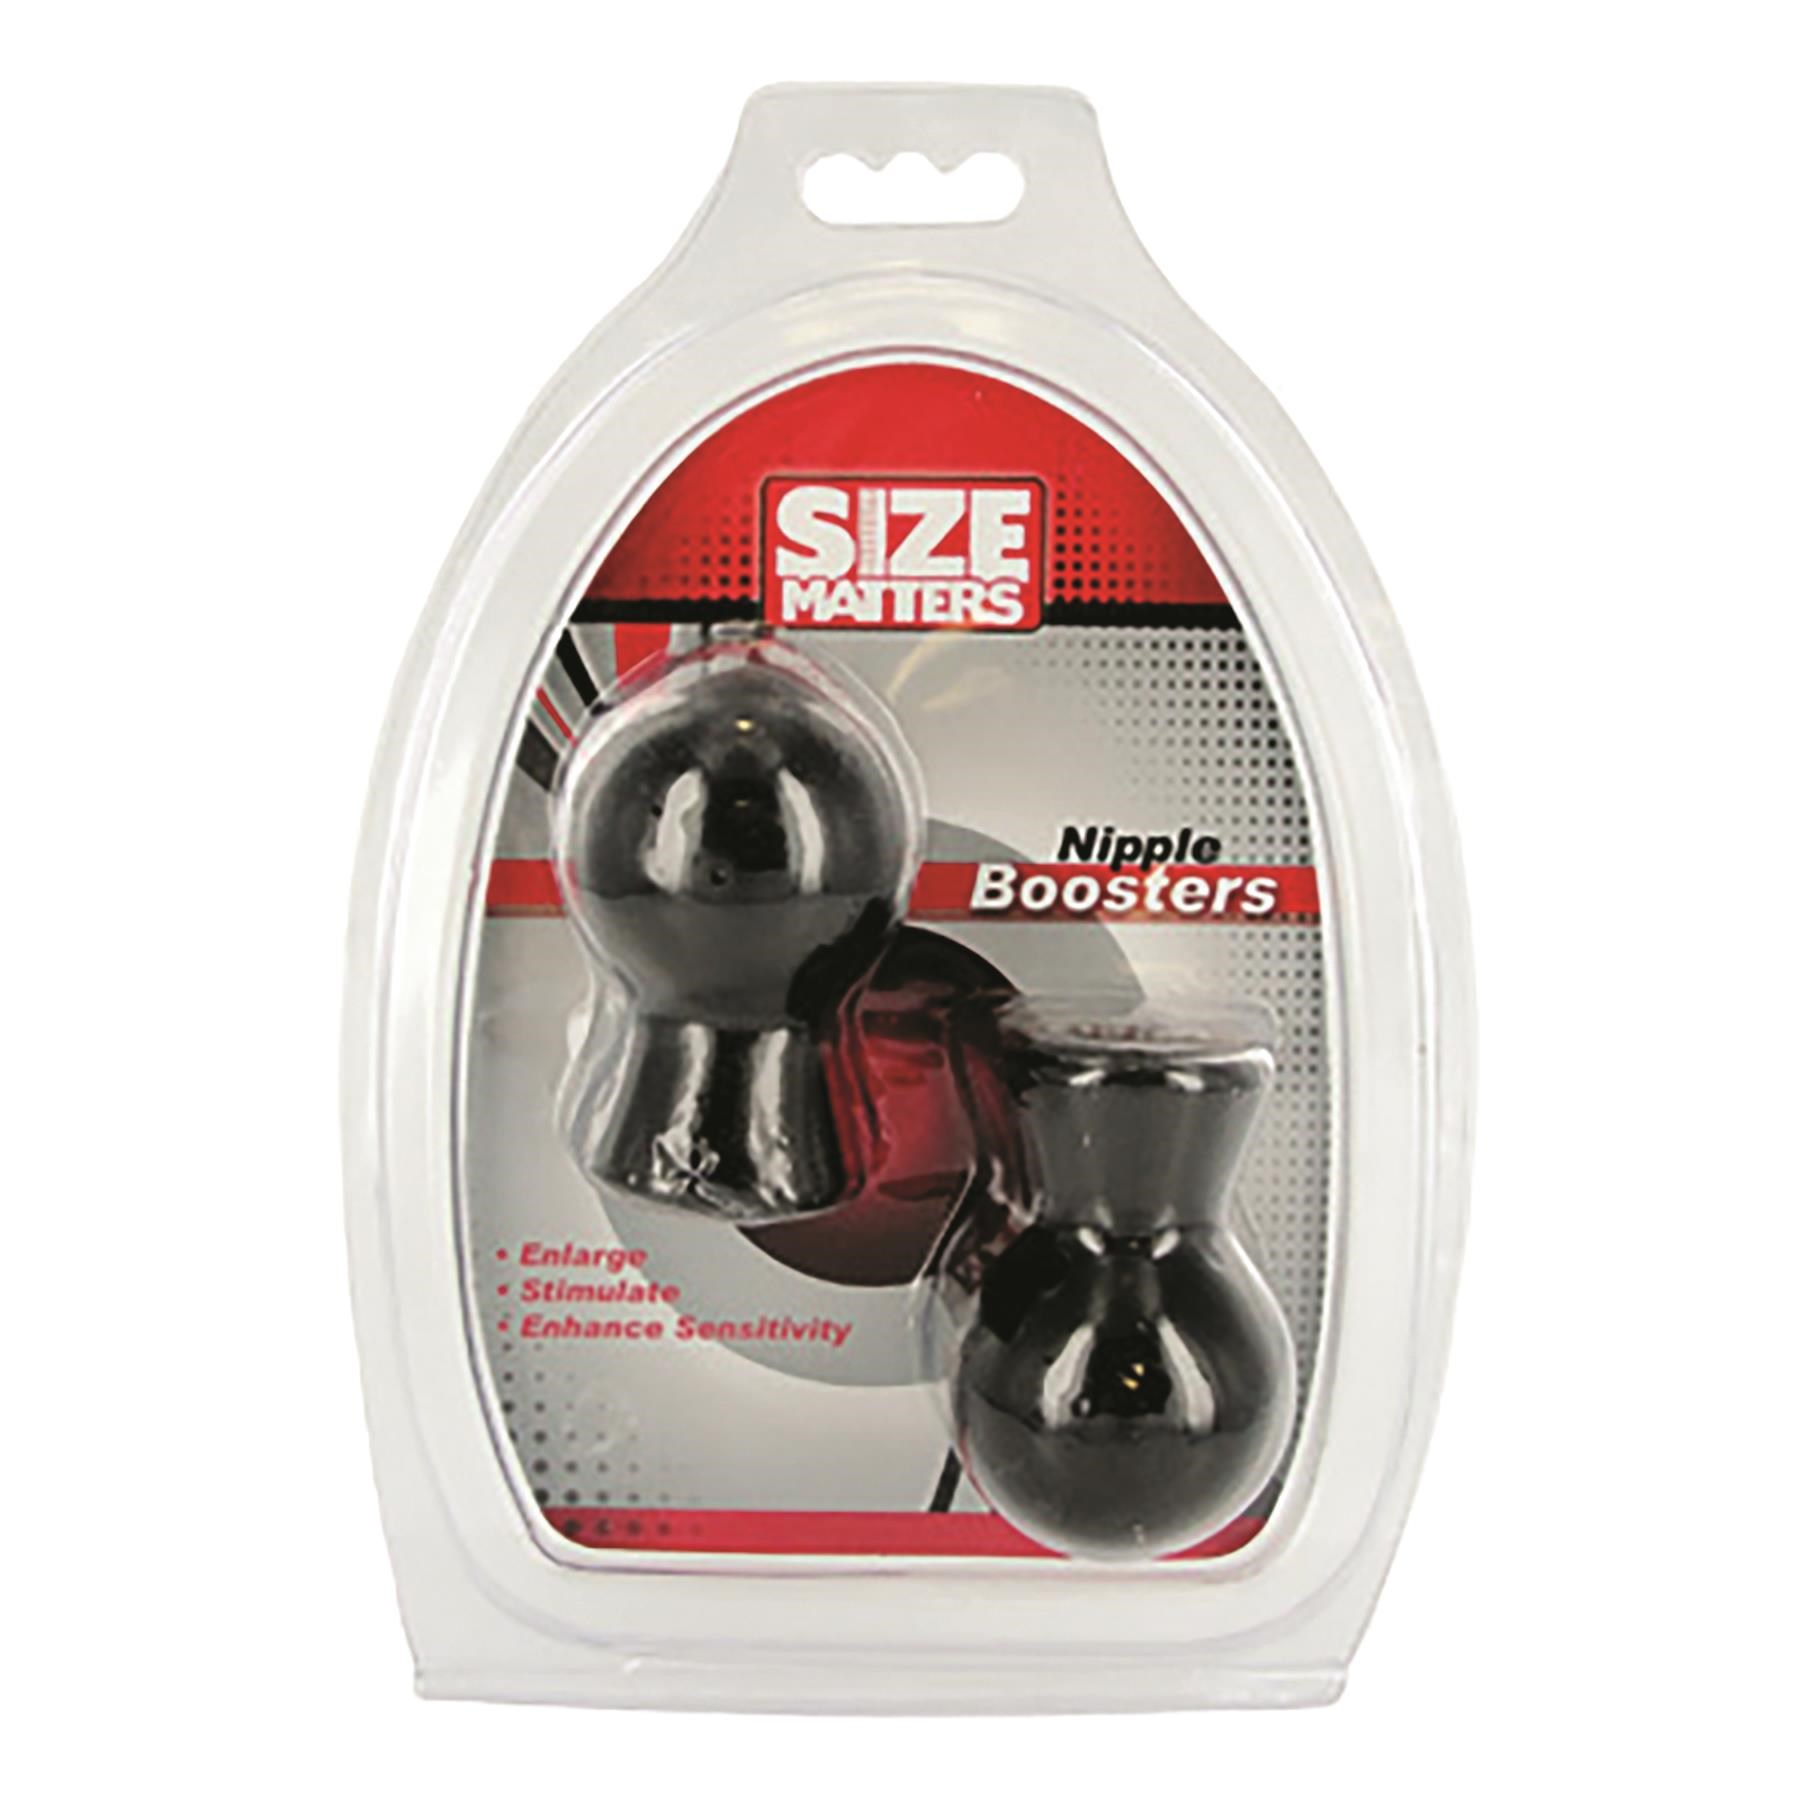 Size Matters Suction Nipple Boosters Package Shot